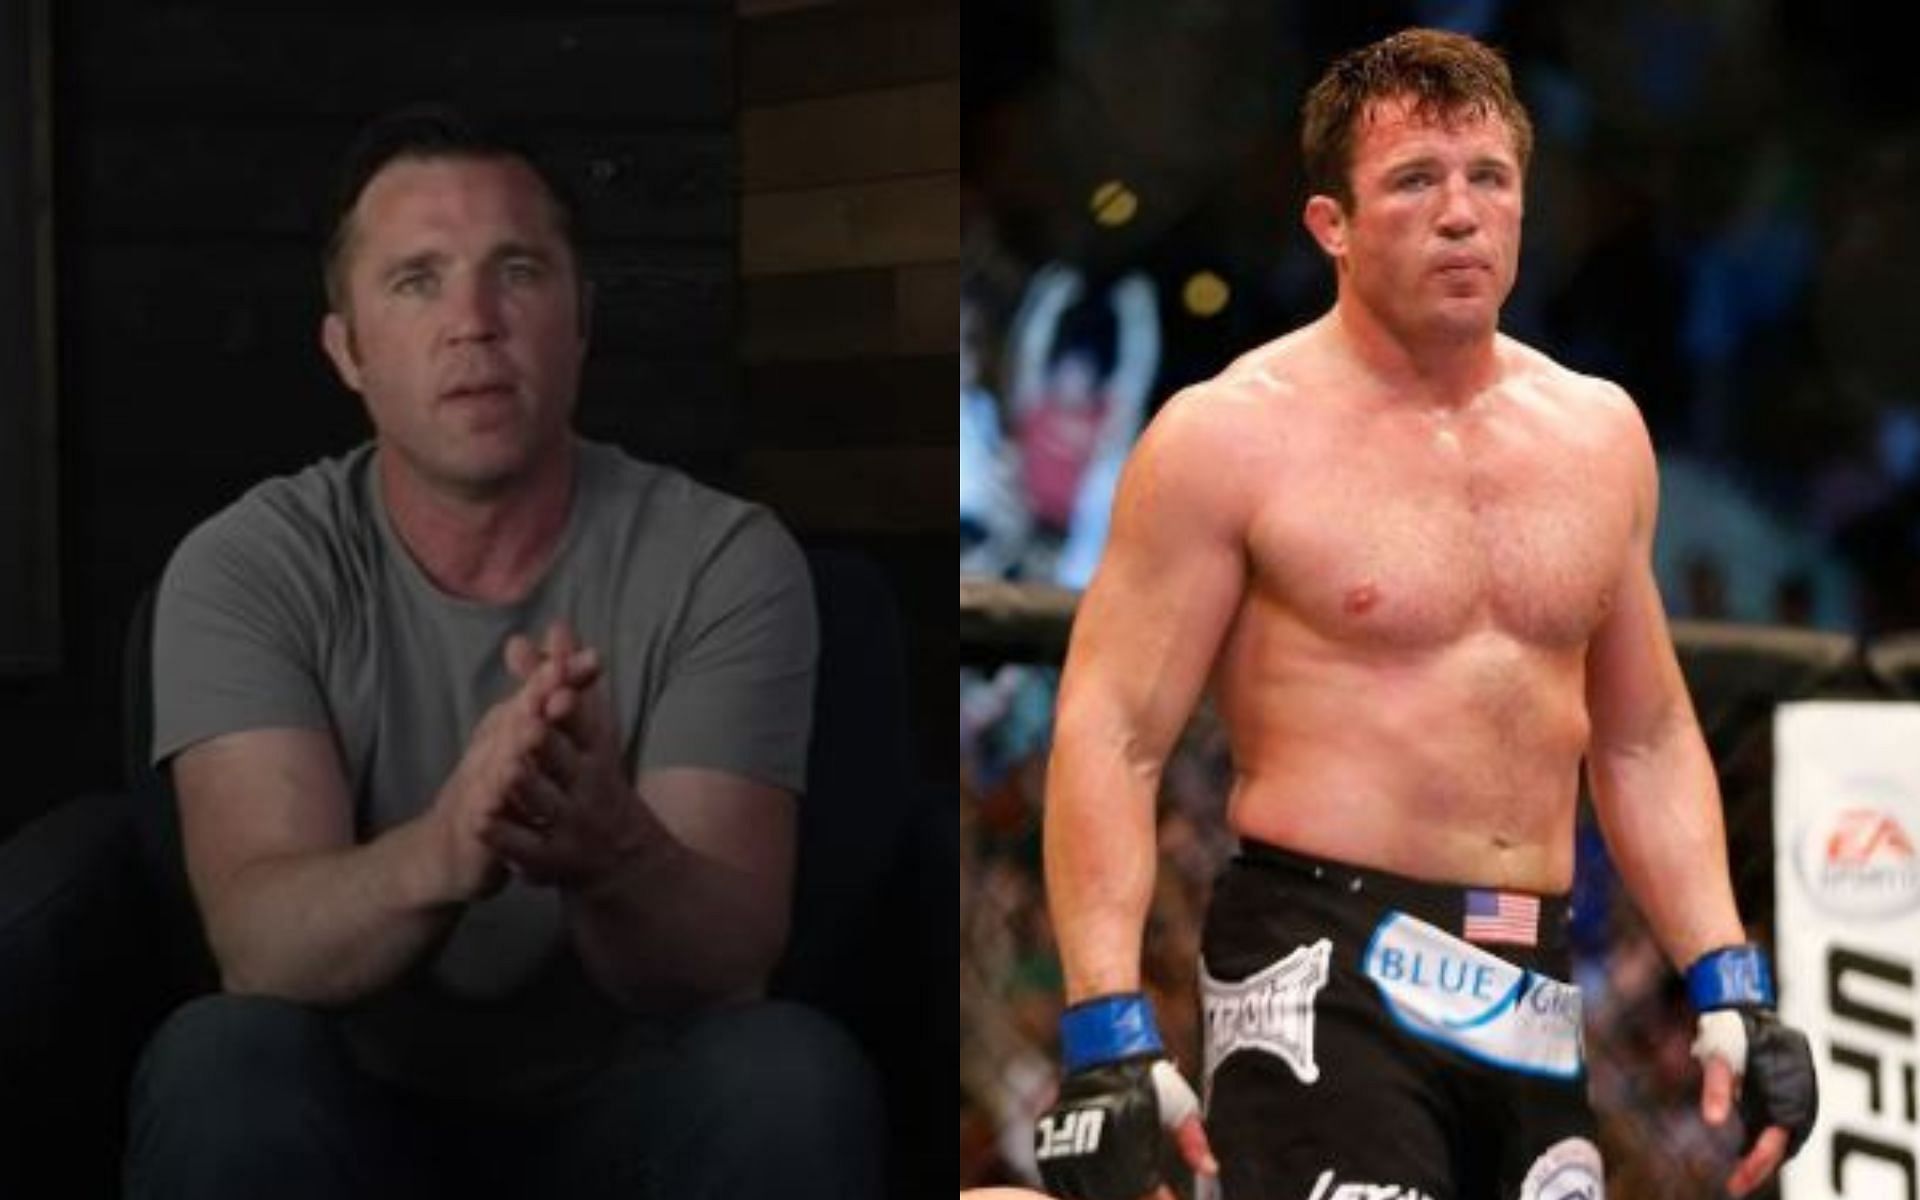 Chael Sonnen [Image credits: YouTube @Chael Sonnen and Getty]